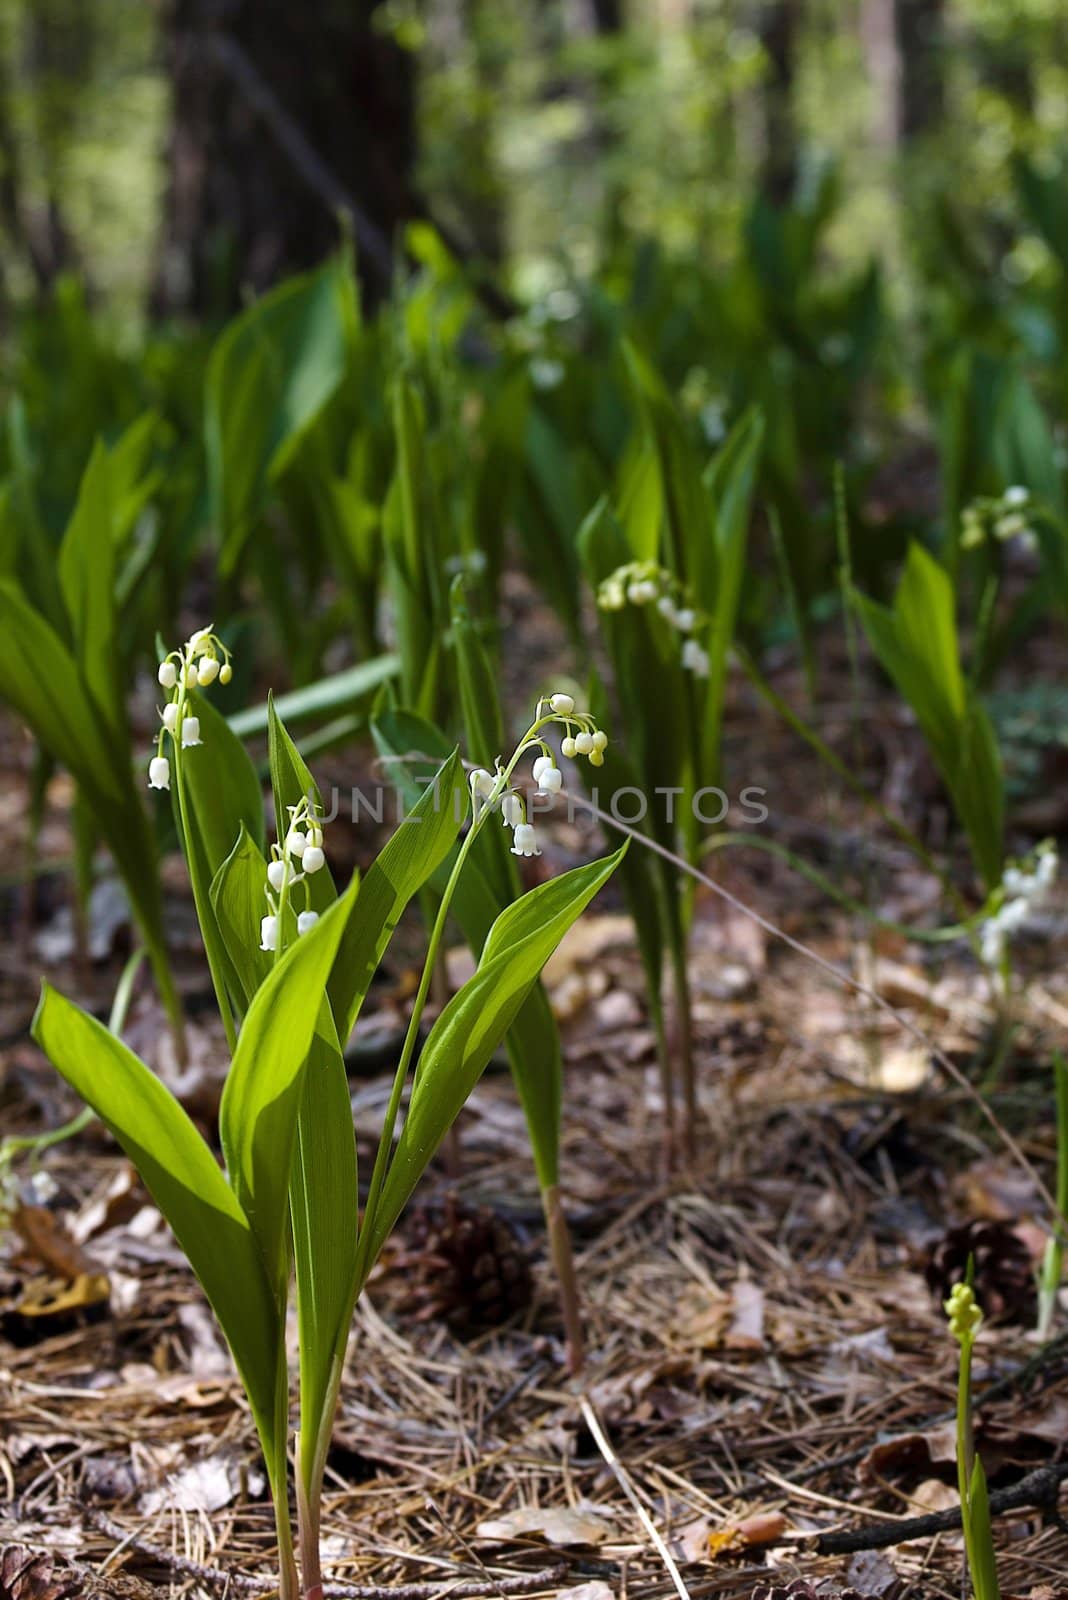 Lily-of-the-valley against a pale green background